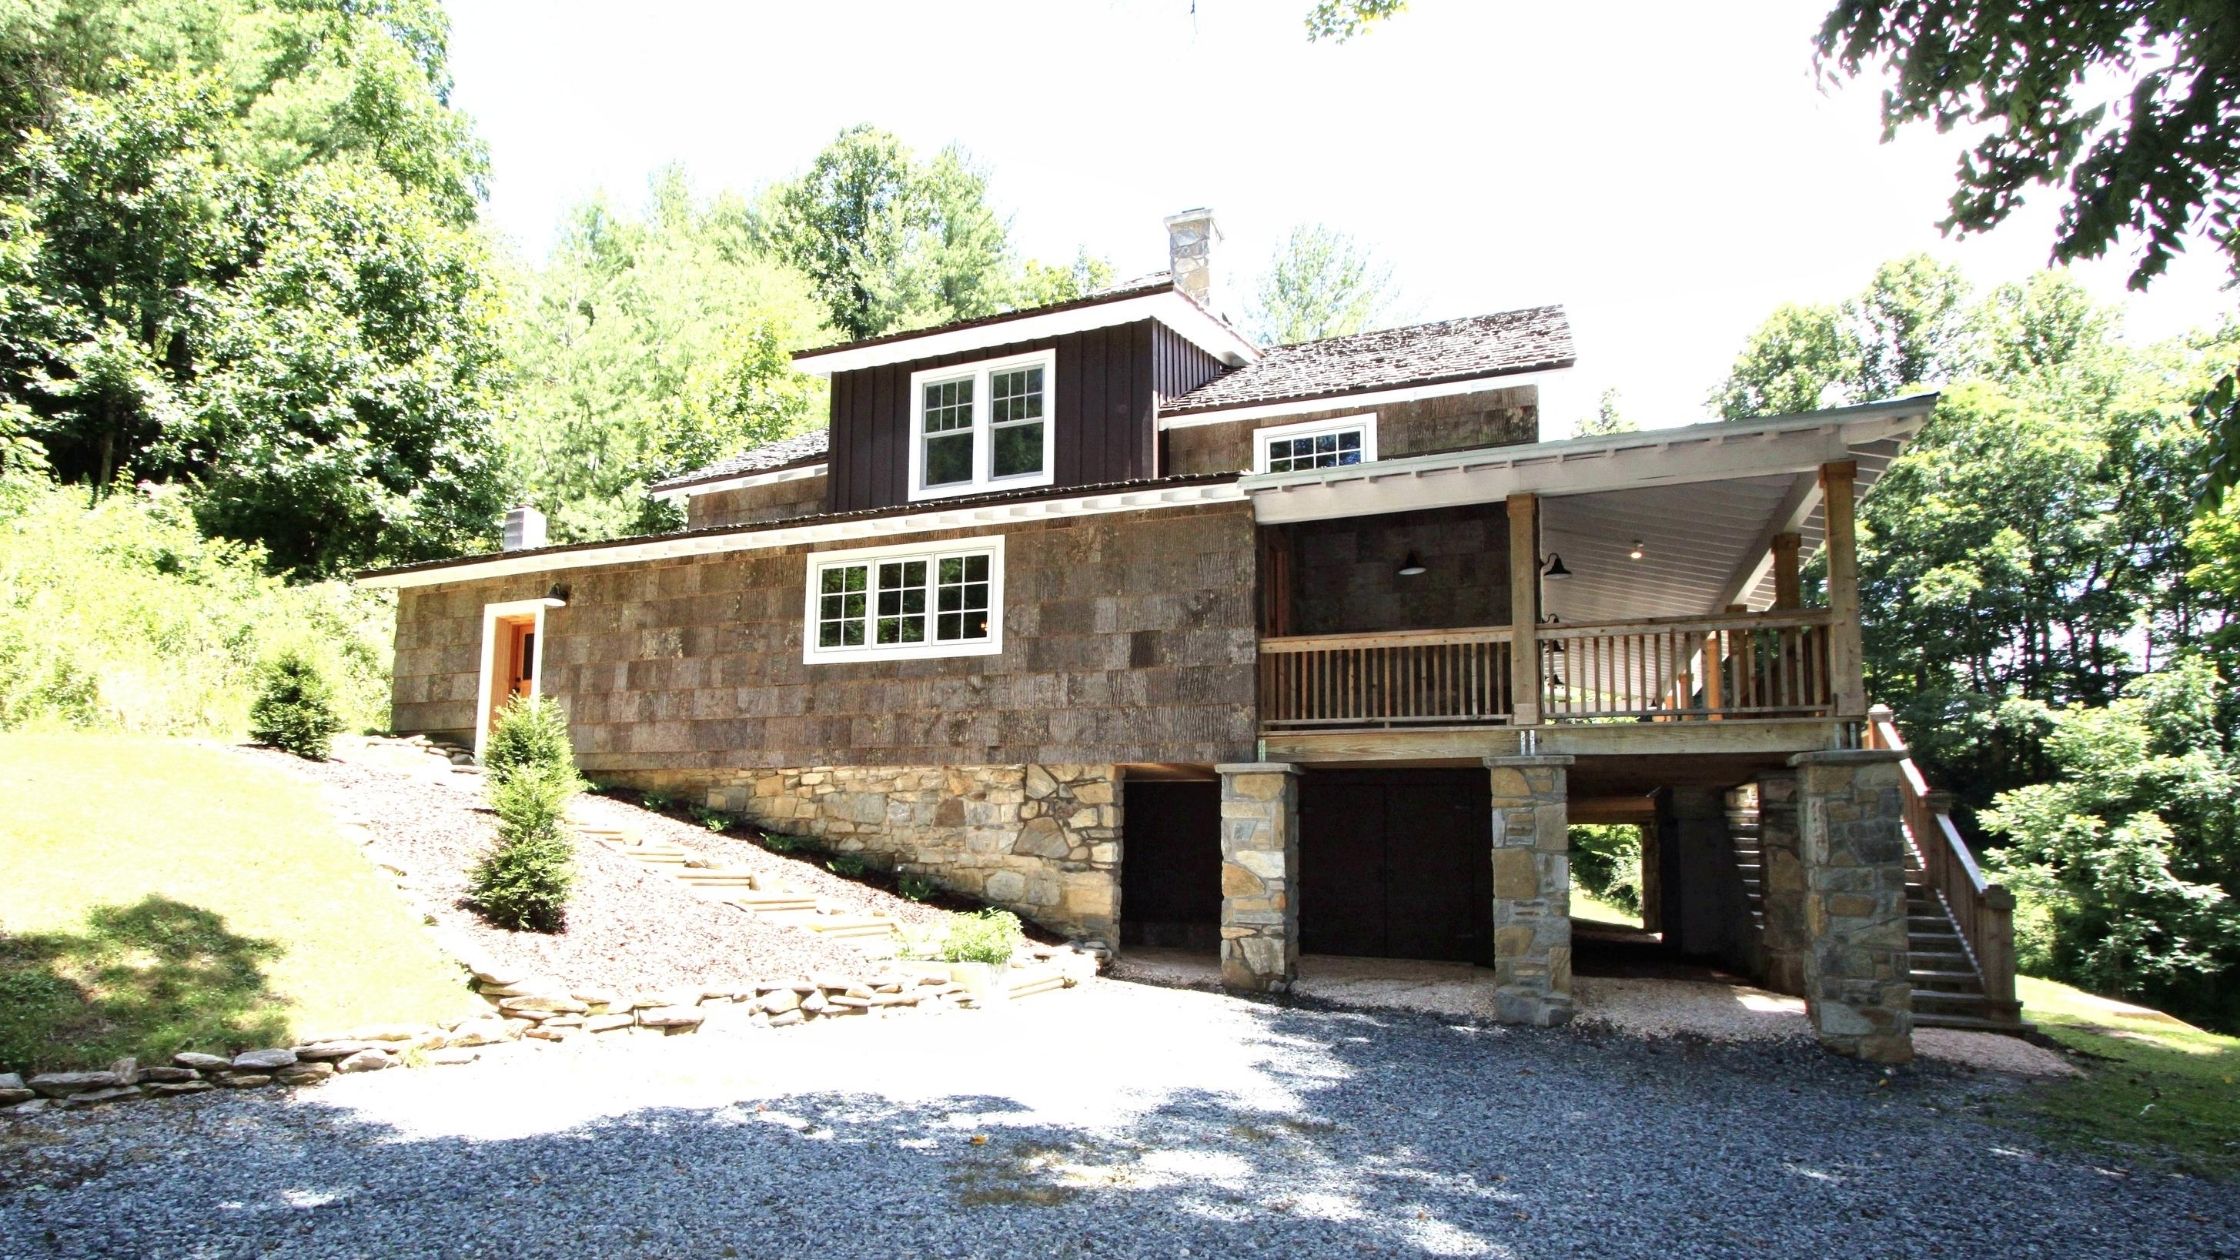 Valle Crucis restored home on Crab Orchard Creek.